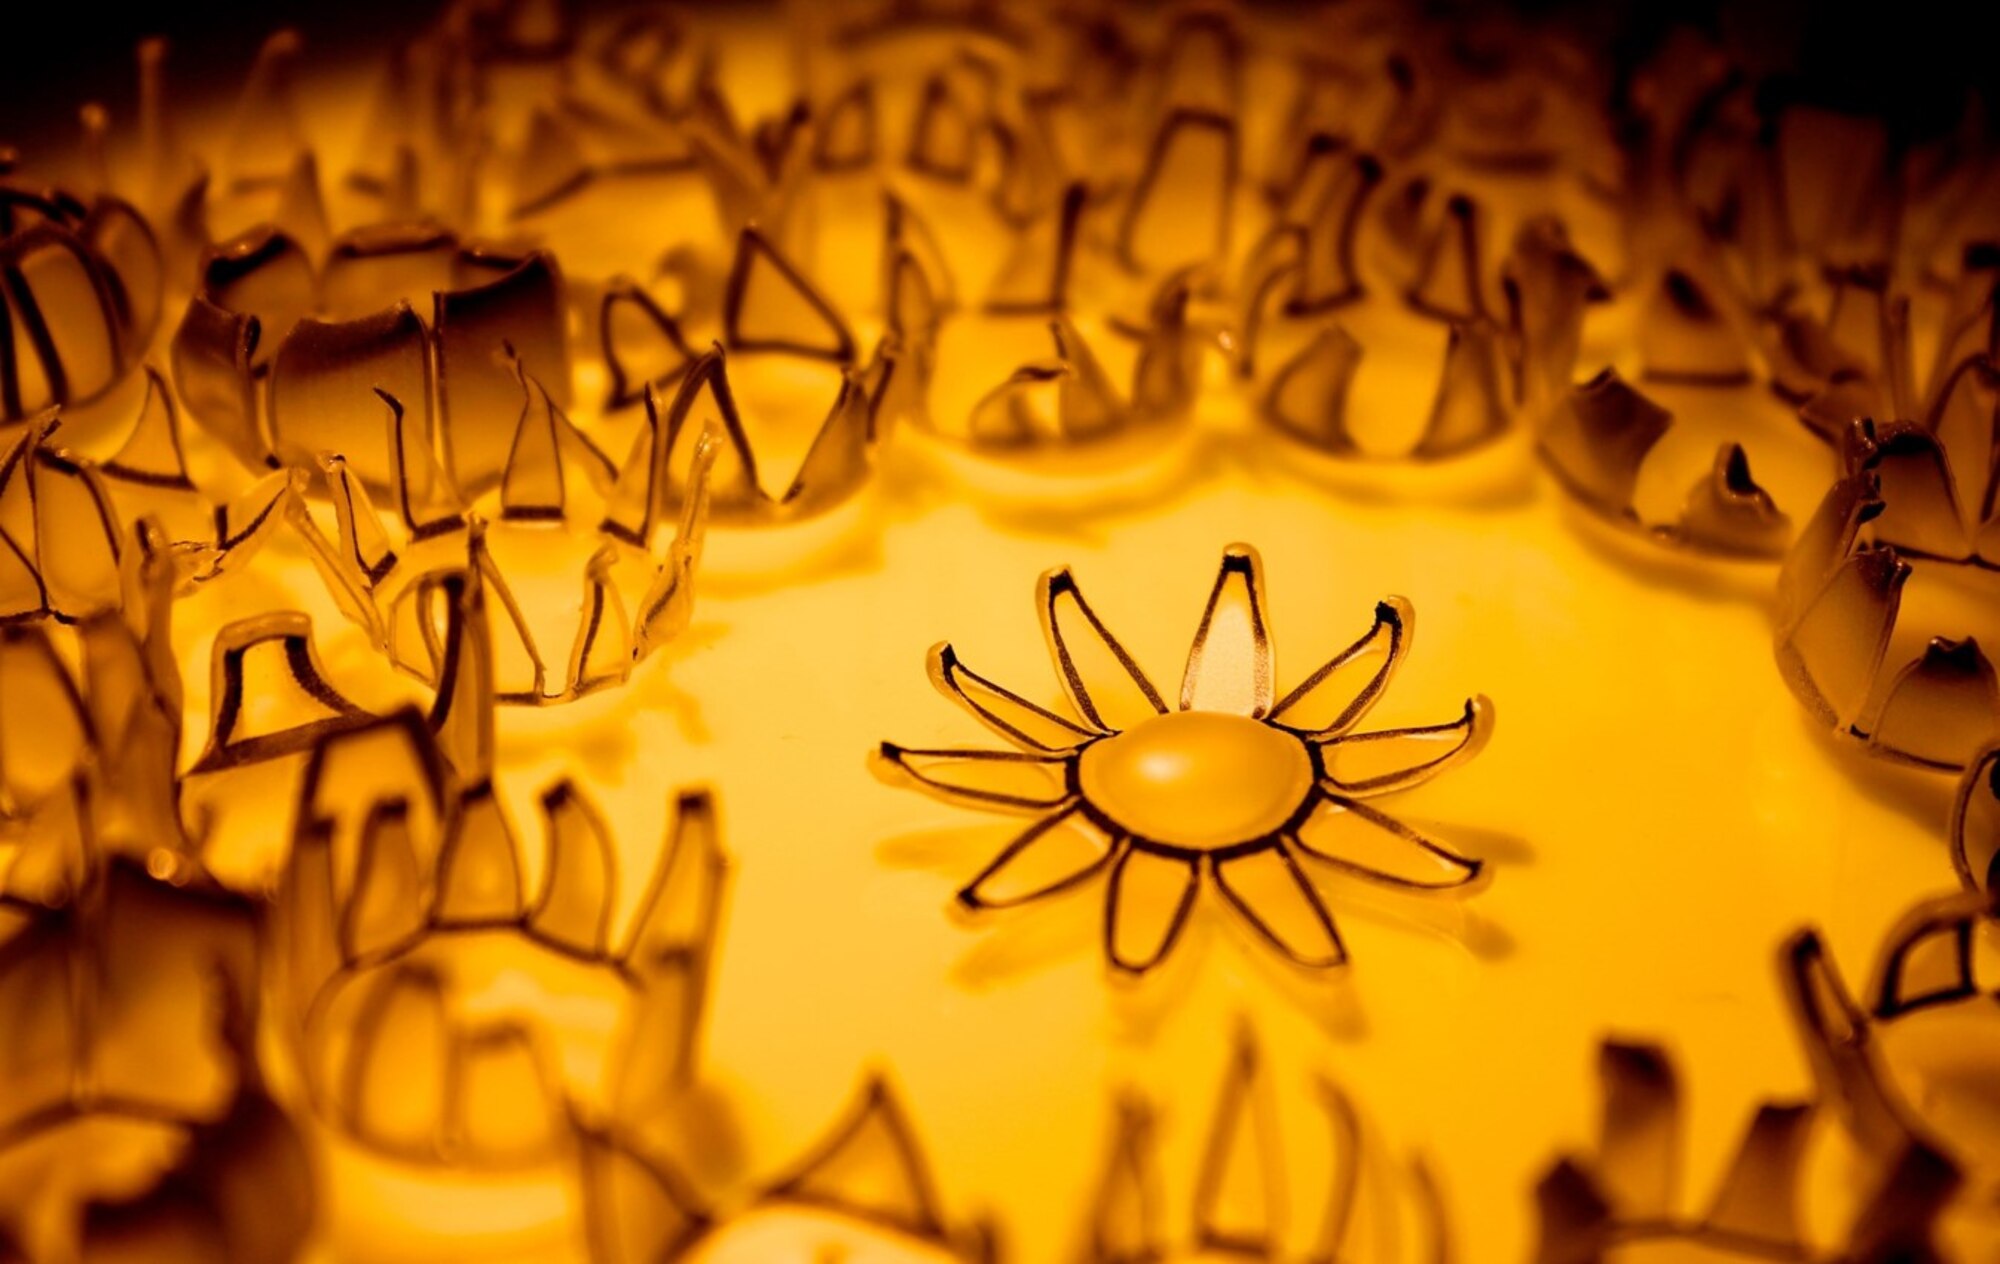 (Thermoplastic) Flower in the Sun. Stimuli-responsive polymers have gained increasing attention for their applications ranging from soft robotic grippers to actuators. By controlling strain within thin thermoplastic sheets, these small grippers can transform into three-dimensional shapes based on a photothermal response and withstand loads more than 24,000 times their own mass. (Courtesy photo/Amber Hubbard)